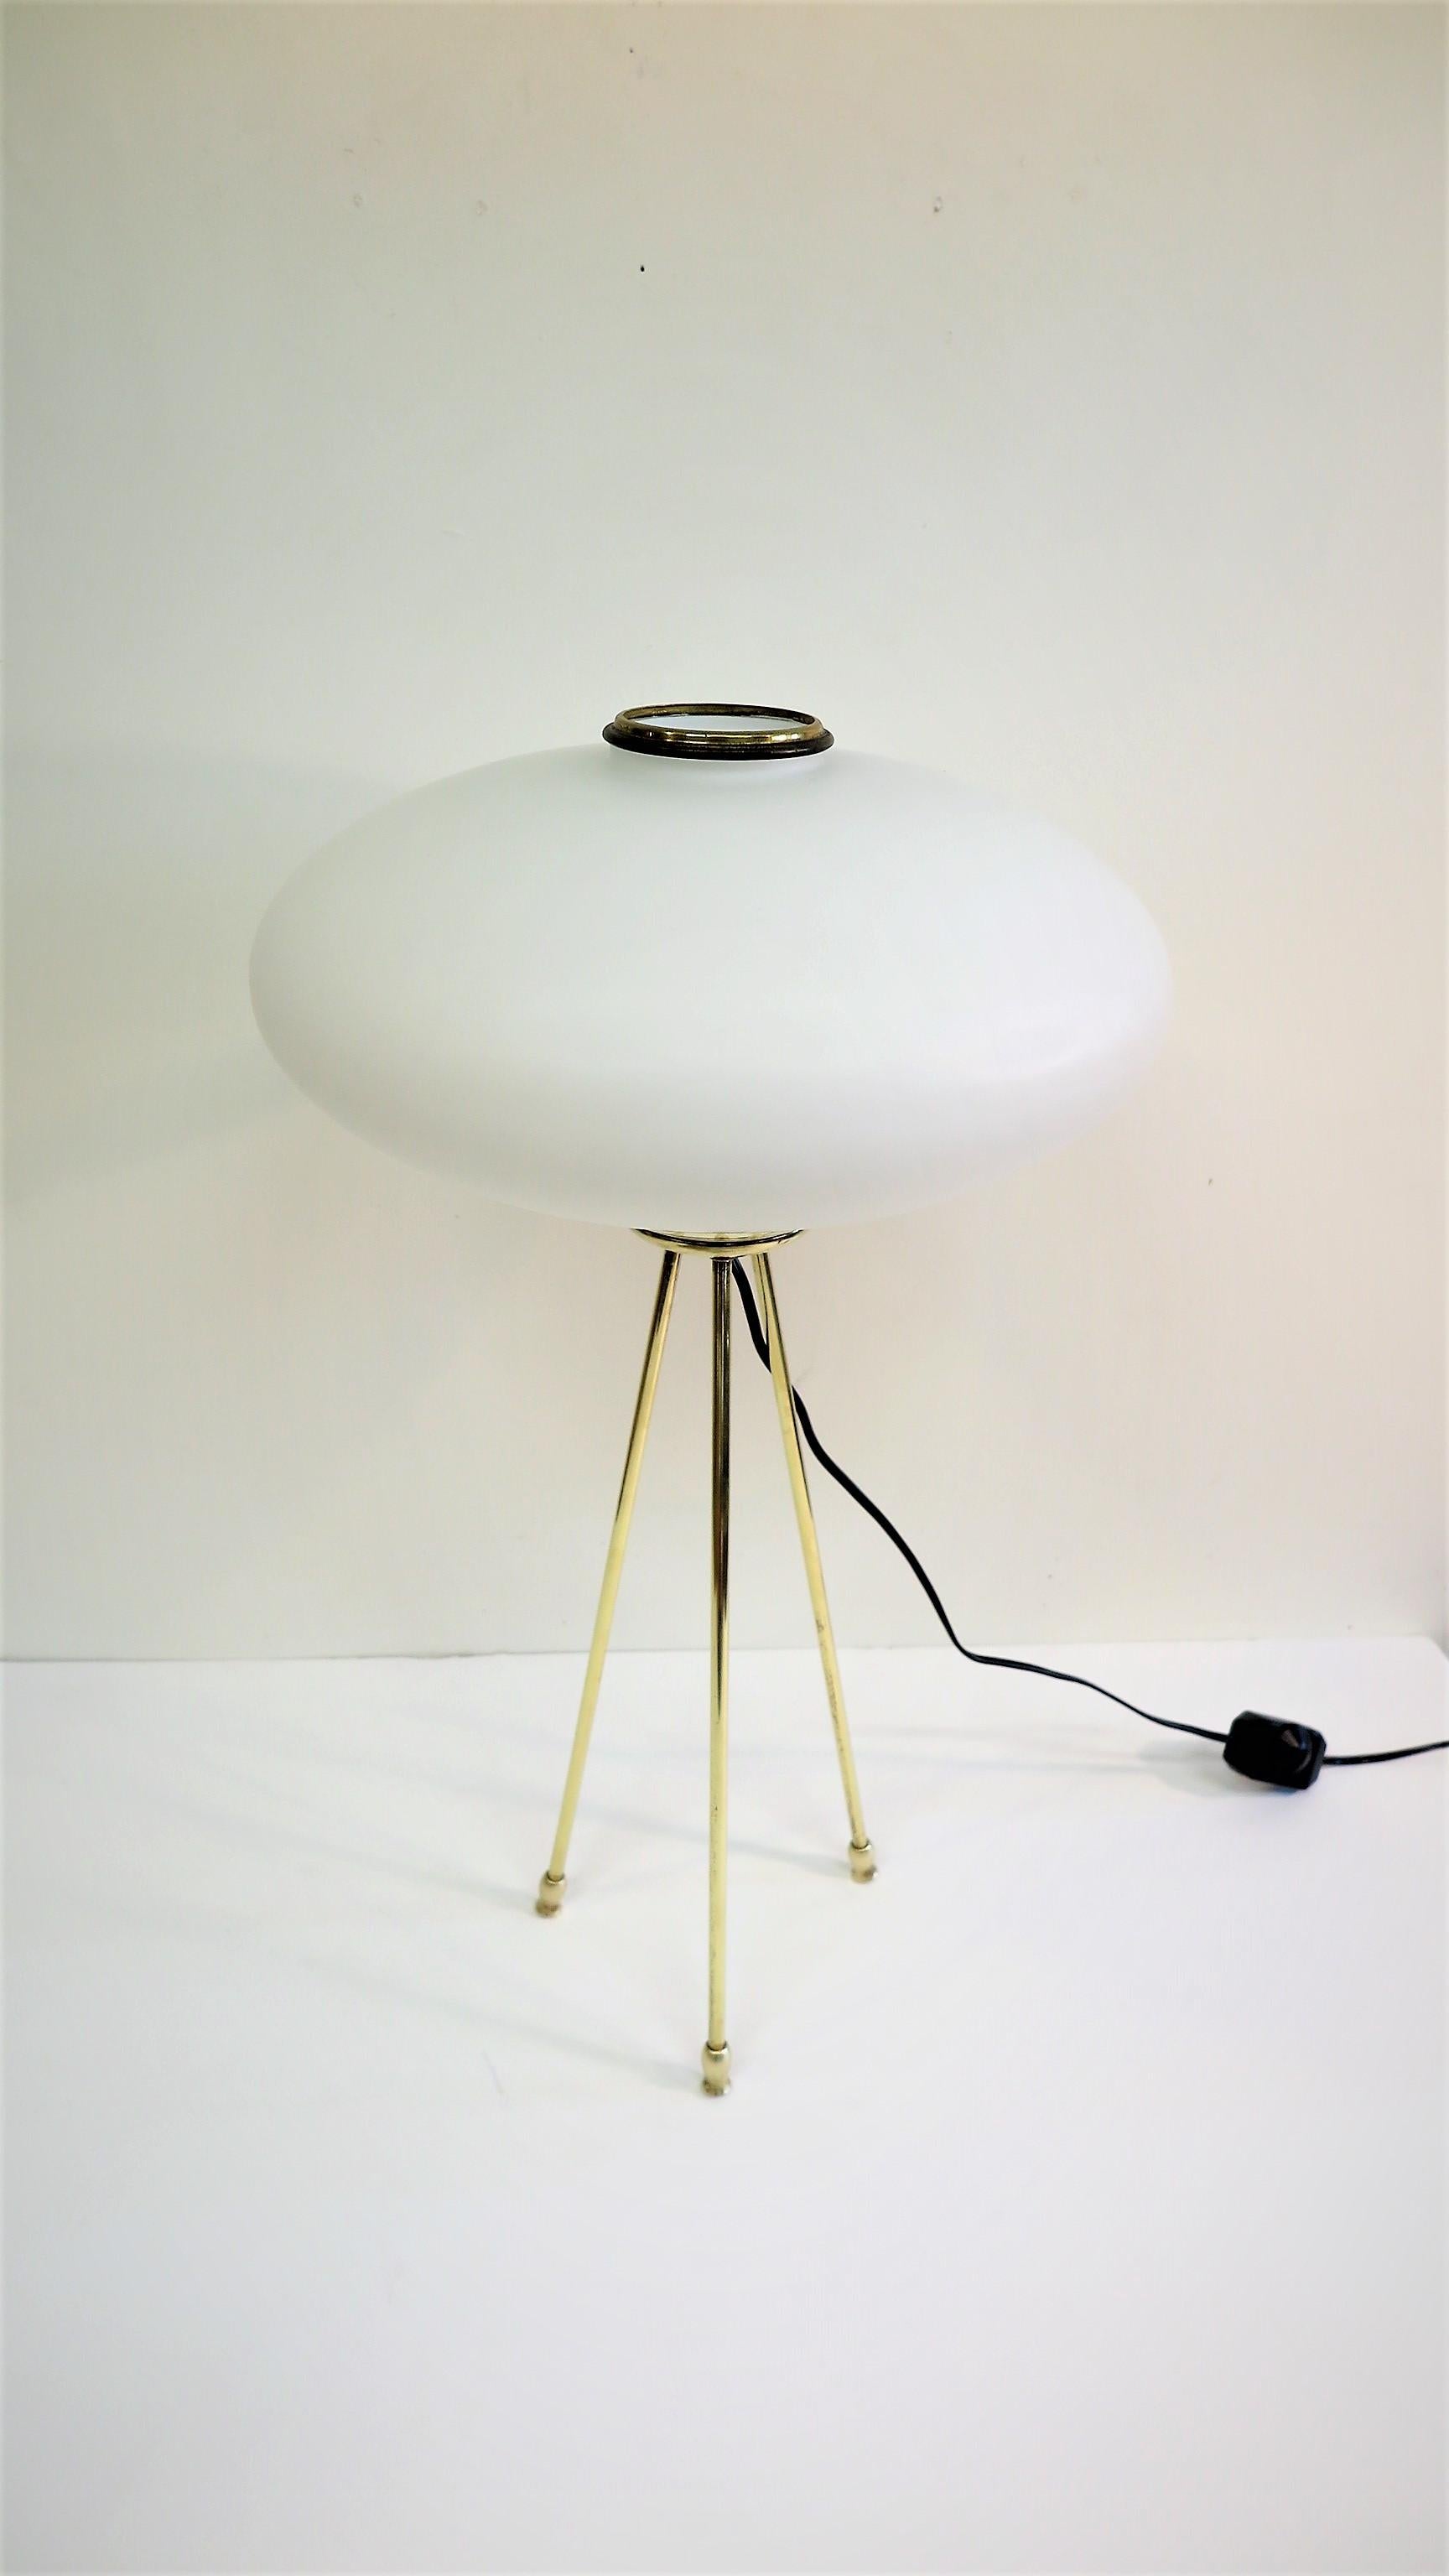 Italian tripod opaline glass and brass lamp attributed to Stilnovo. Midcentury opaline glass and brass tripod lamp, Italy, 1950-1960. Can be used on table or floor. Excellent light spread or mood lighting can be adjusted with dimmer. In very good